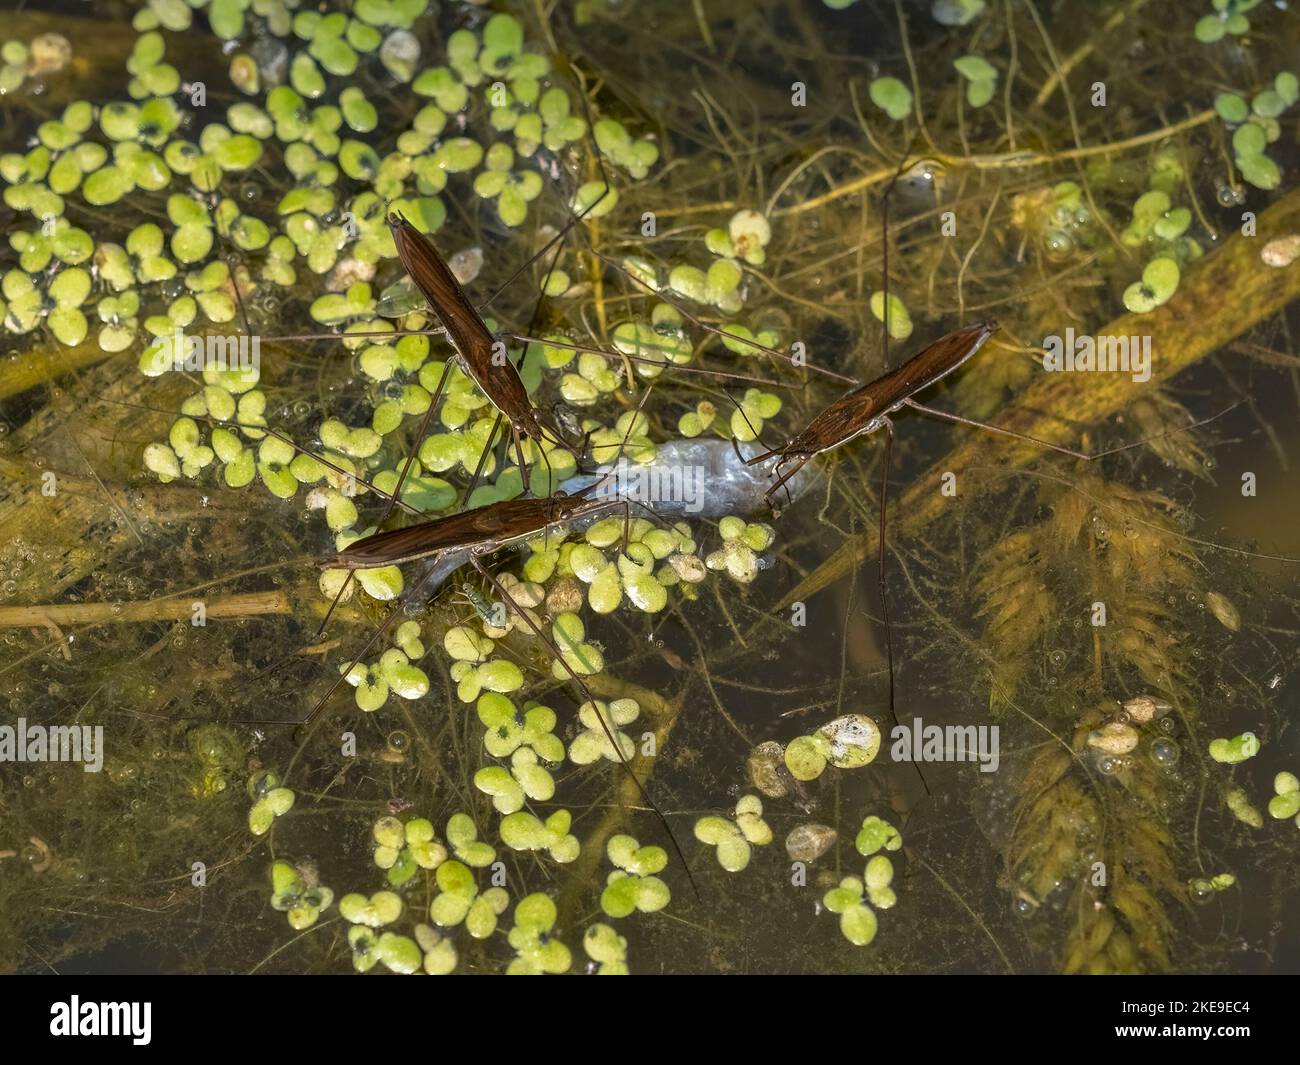 view from above of a group of aquatic water striders (Gerridae species) of different development stages feeding on a dead three-spined stickleback fis Stock Photo